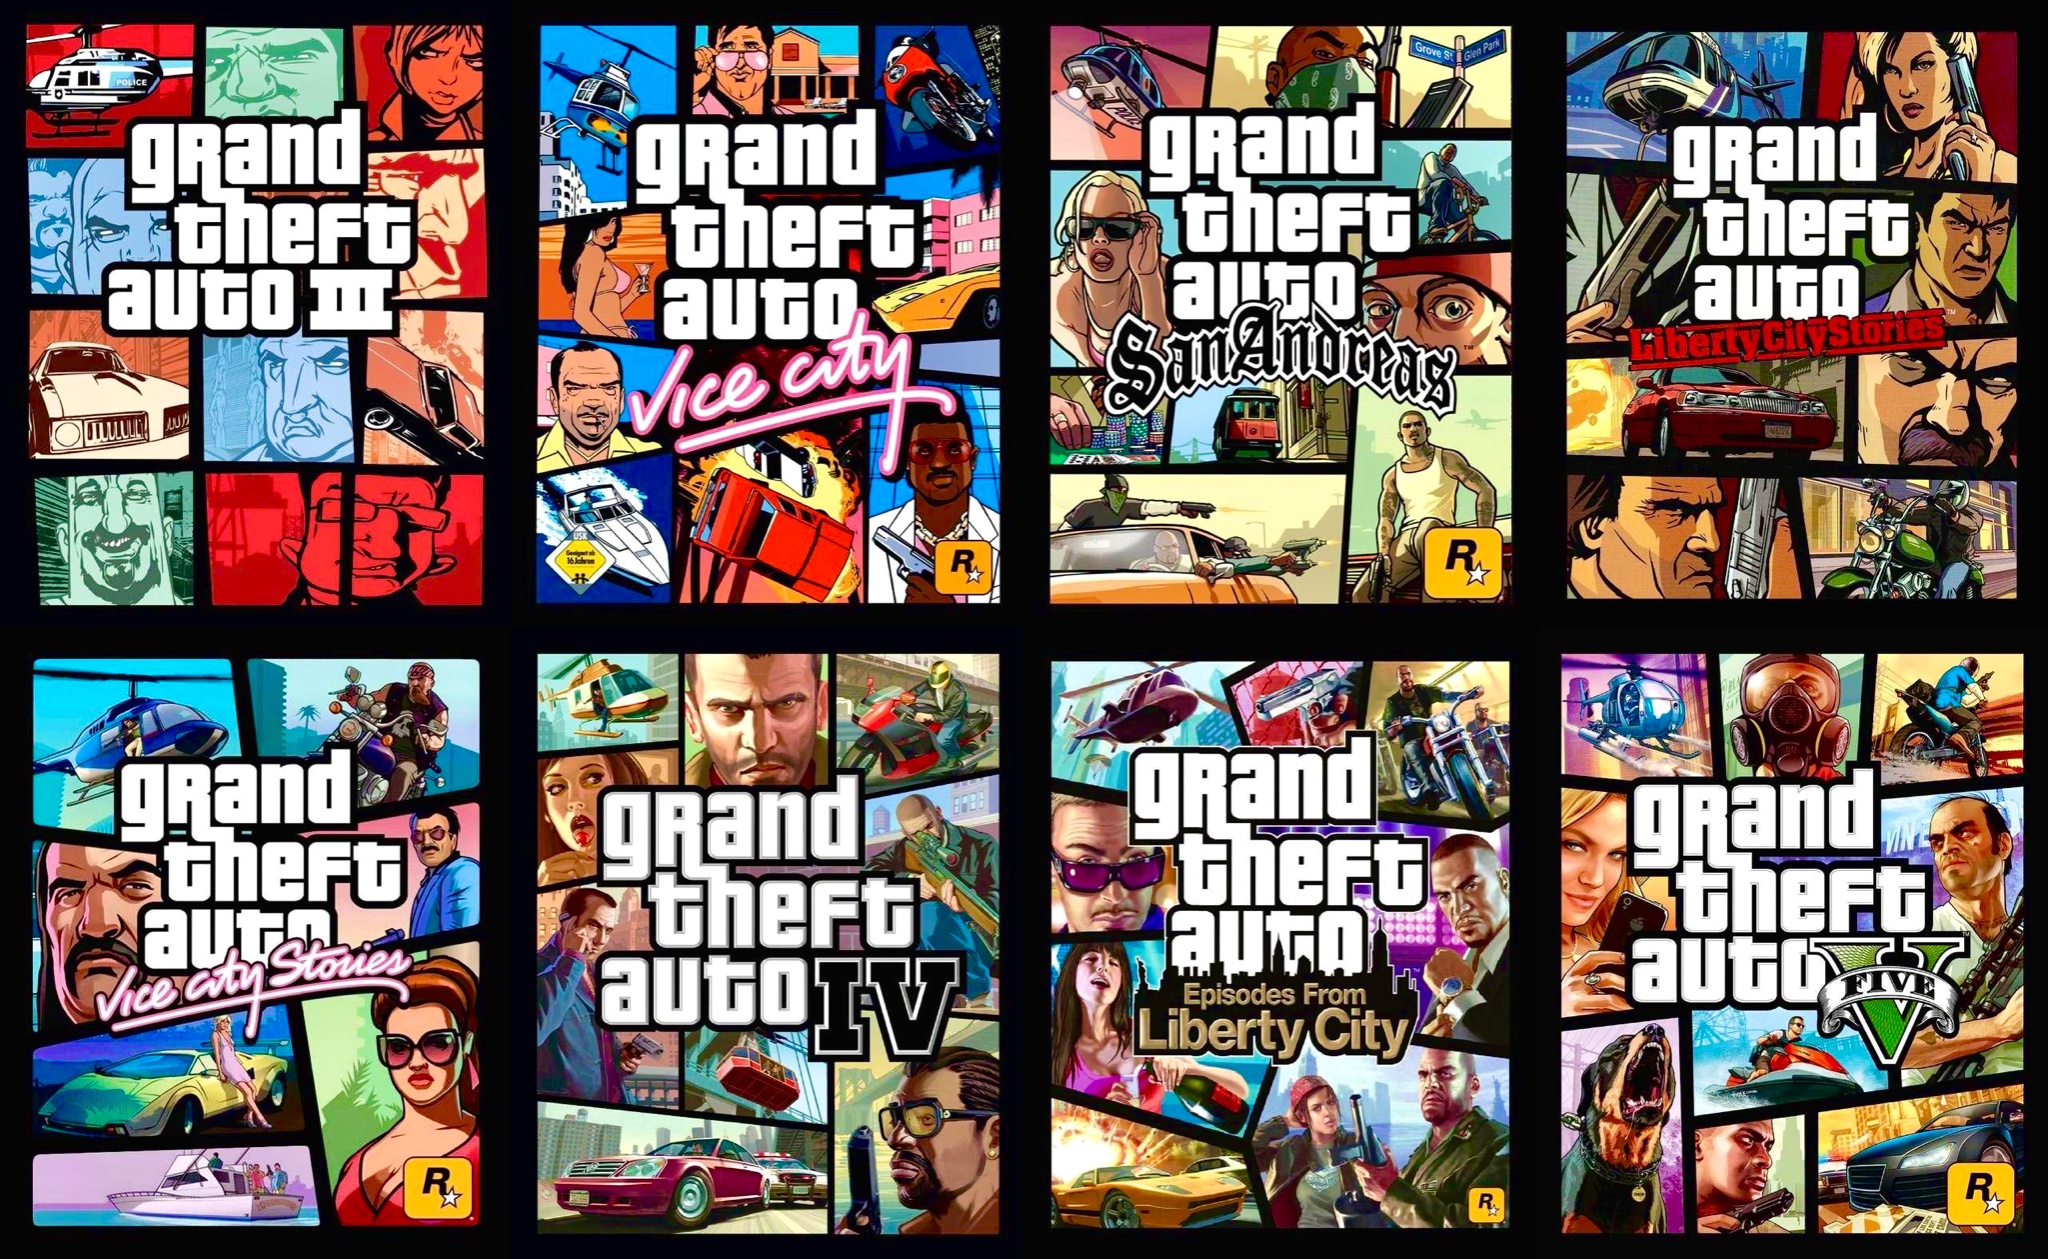 beslutte Alle slags bruger GTA 6 Trailer Countdown ⏳ on Twitter: "Fact: every GTA game cover has a  helicopter on the top left corner. https://t.co/DzyIhFGZK4" / Twitter